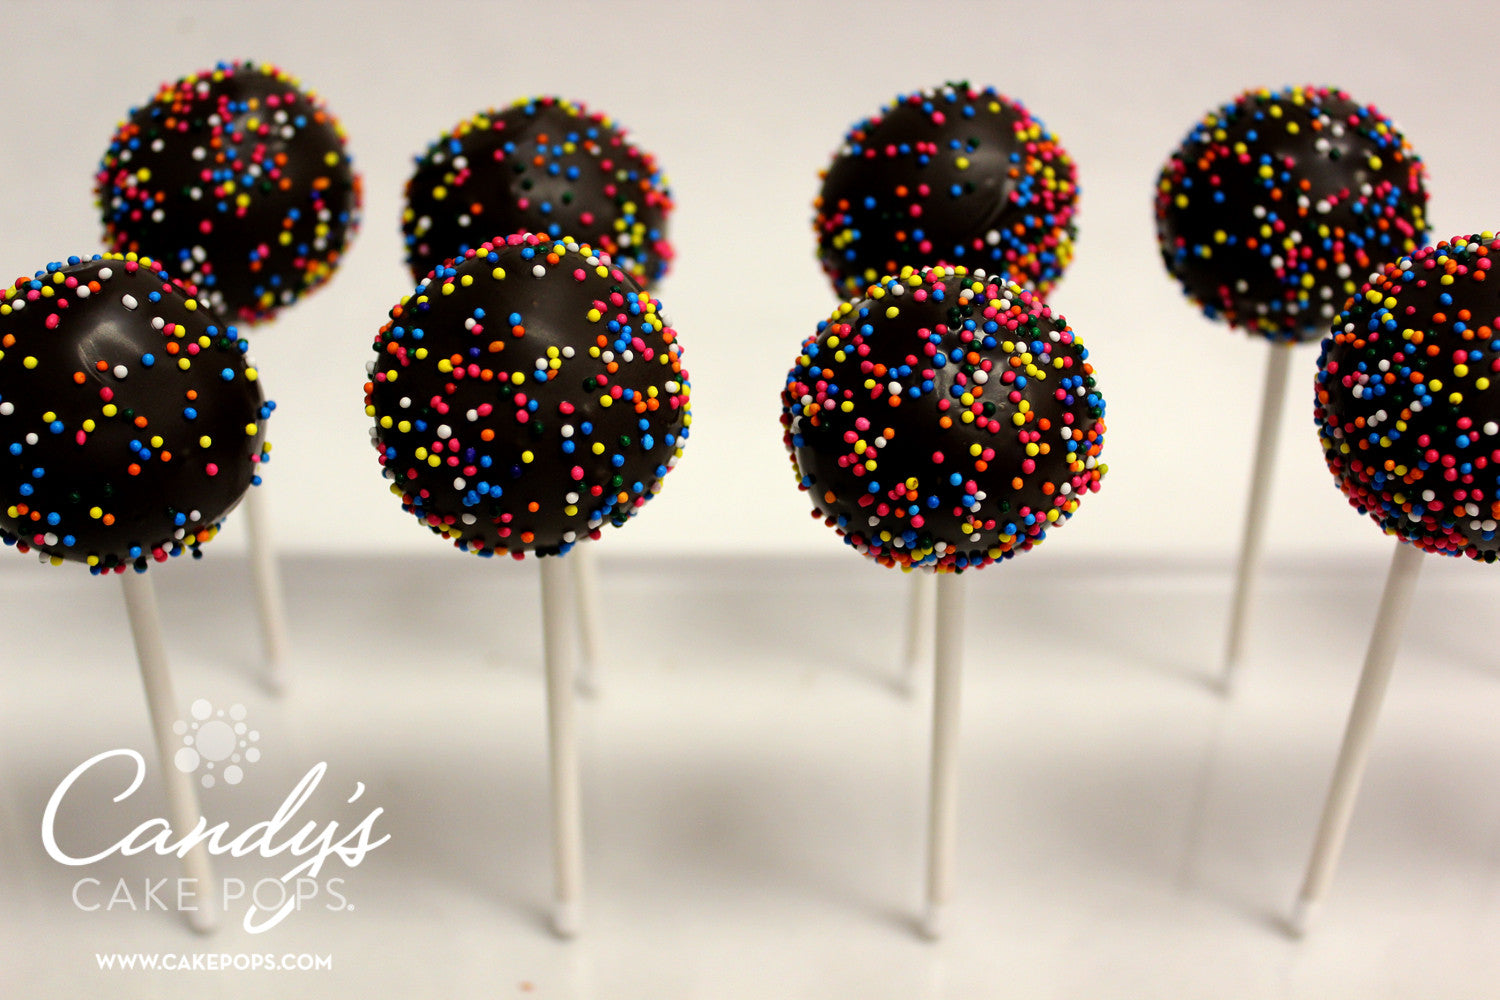 Acrylic Cake Pop Stand - Holds 12 - Candy's Cake Pops